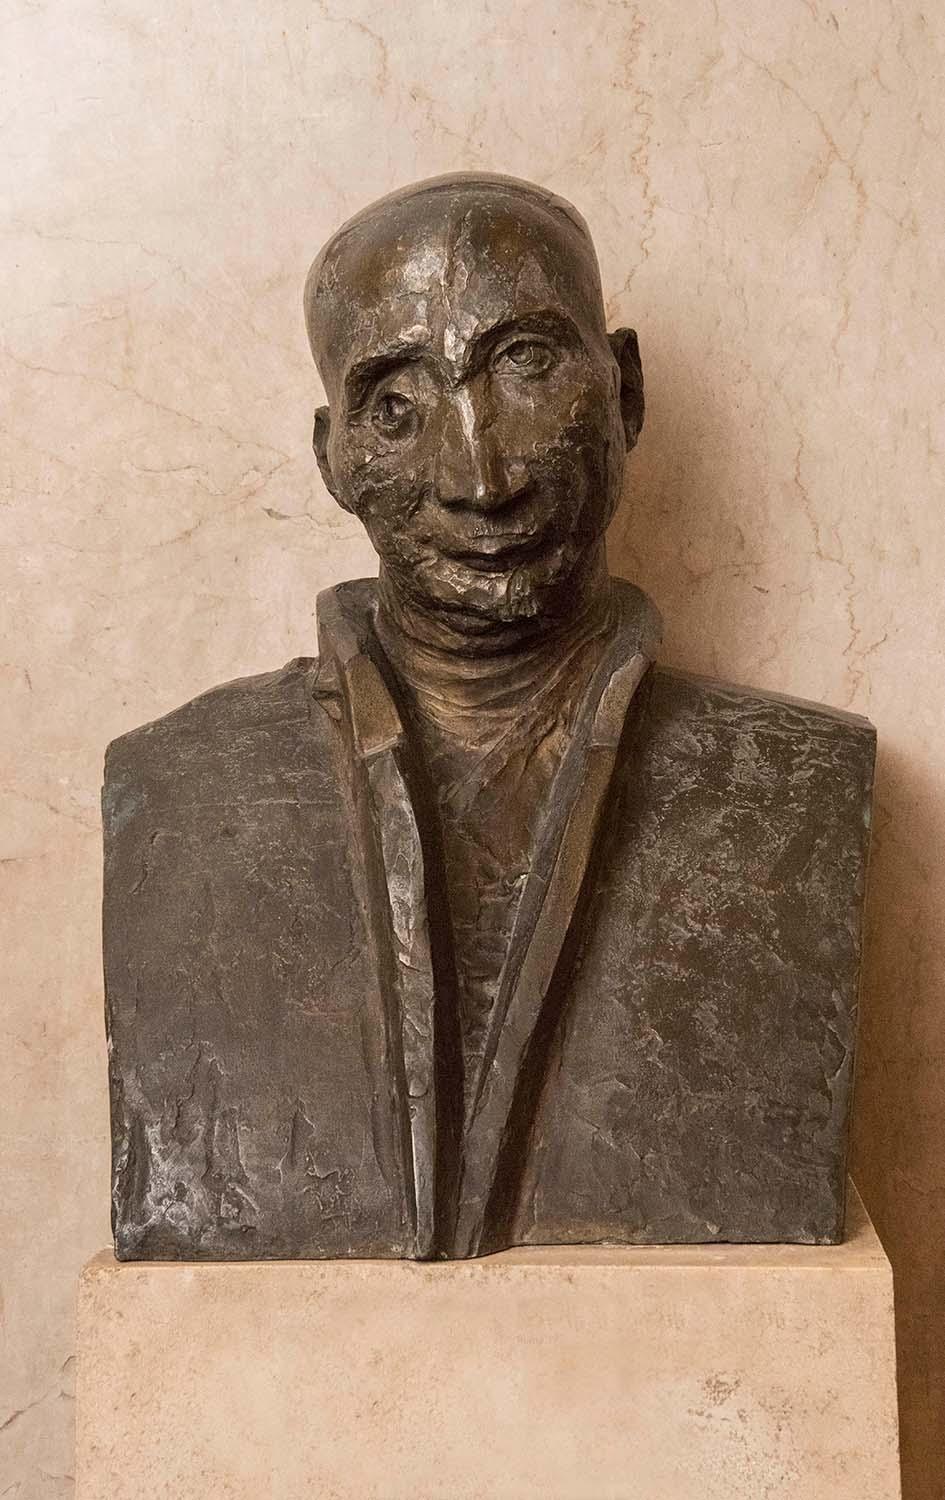 Bust of Gaetano Carolei, Gold Medal of Military Valour recipient, by Roberto Melli